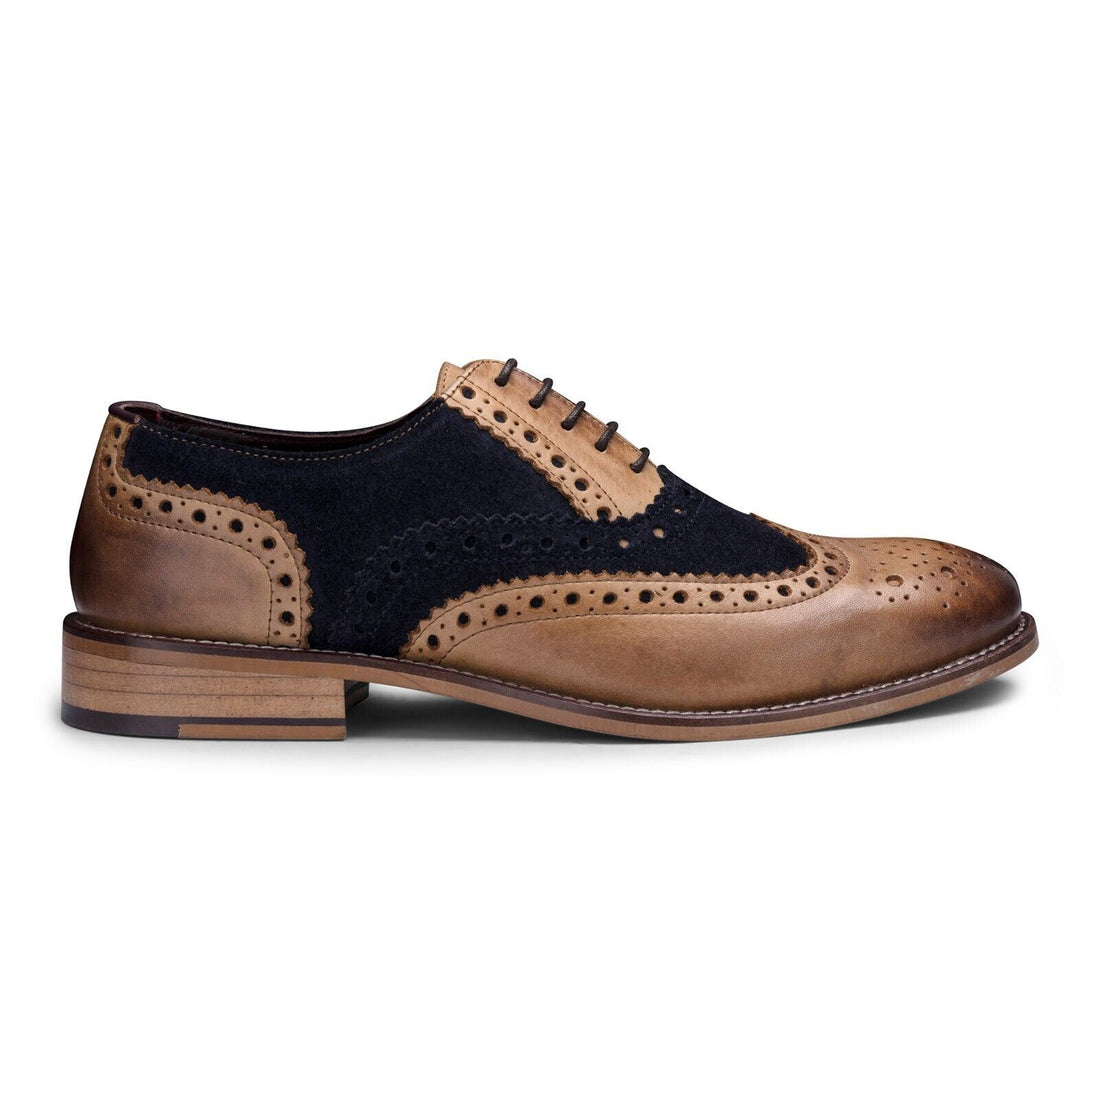 Mens Classic Oxford Tan Leather Gatsby Brogue Shoes with Navy Suede